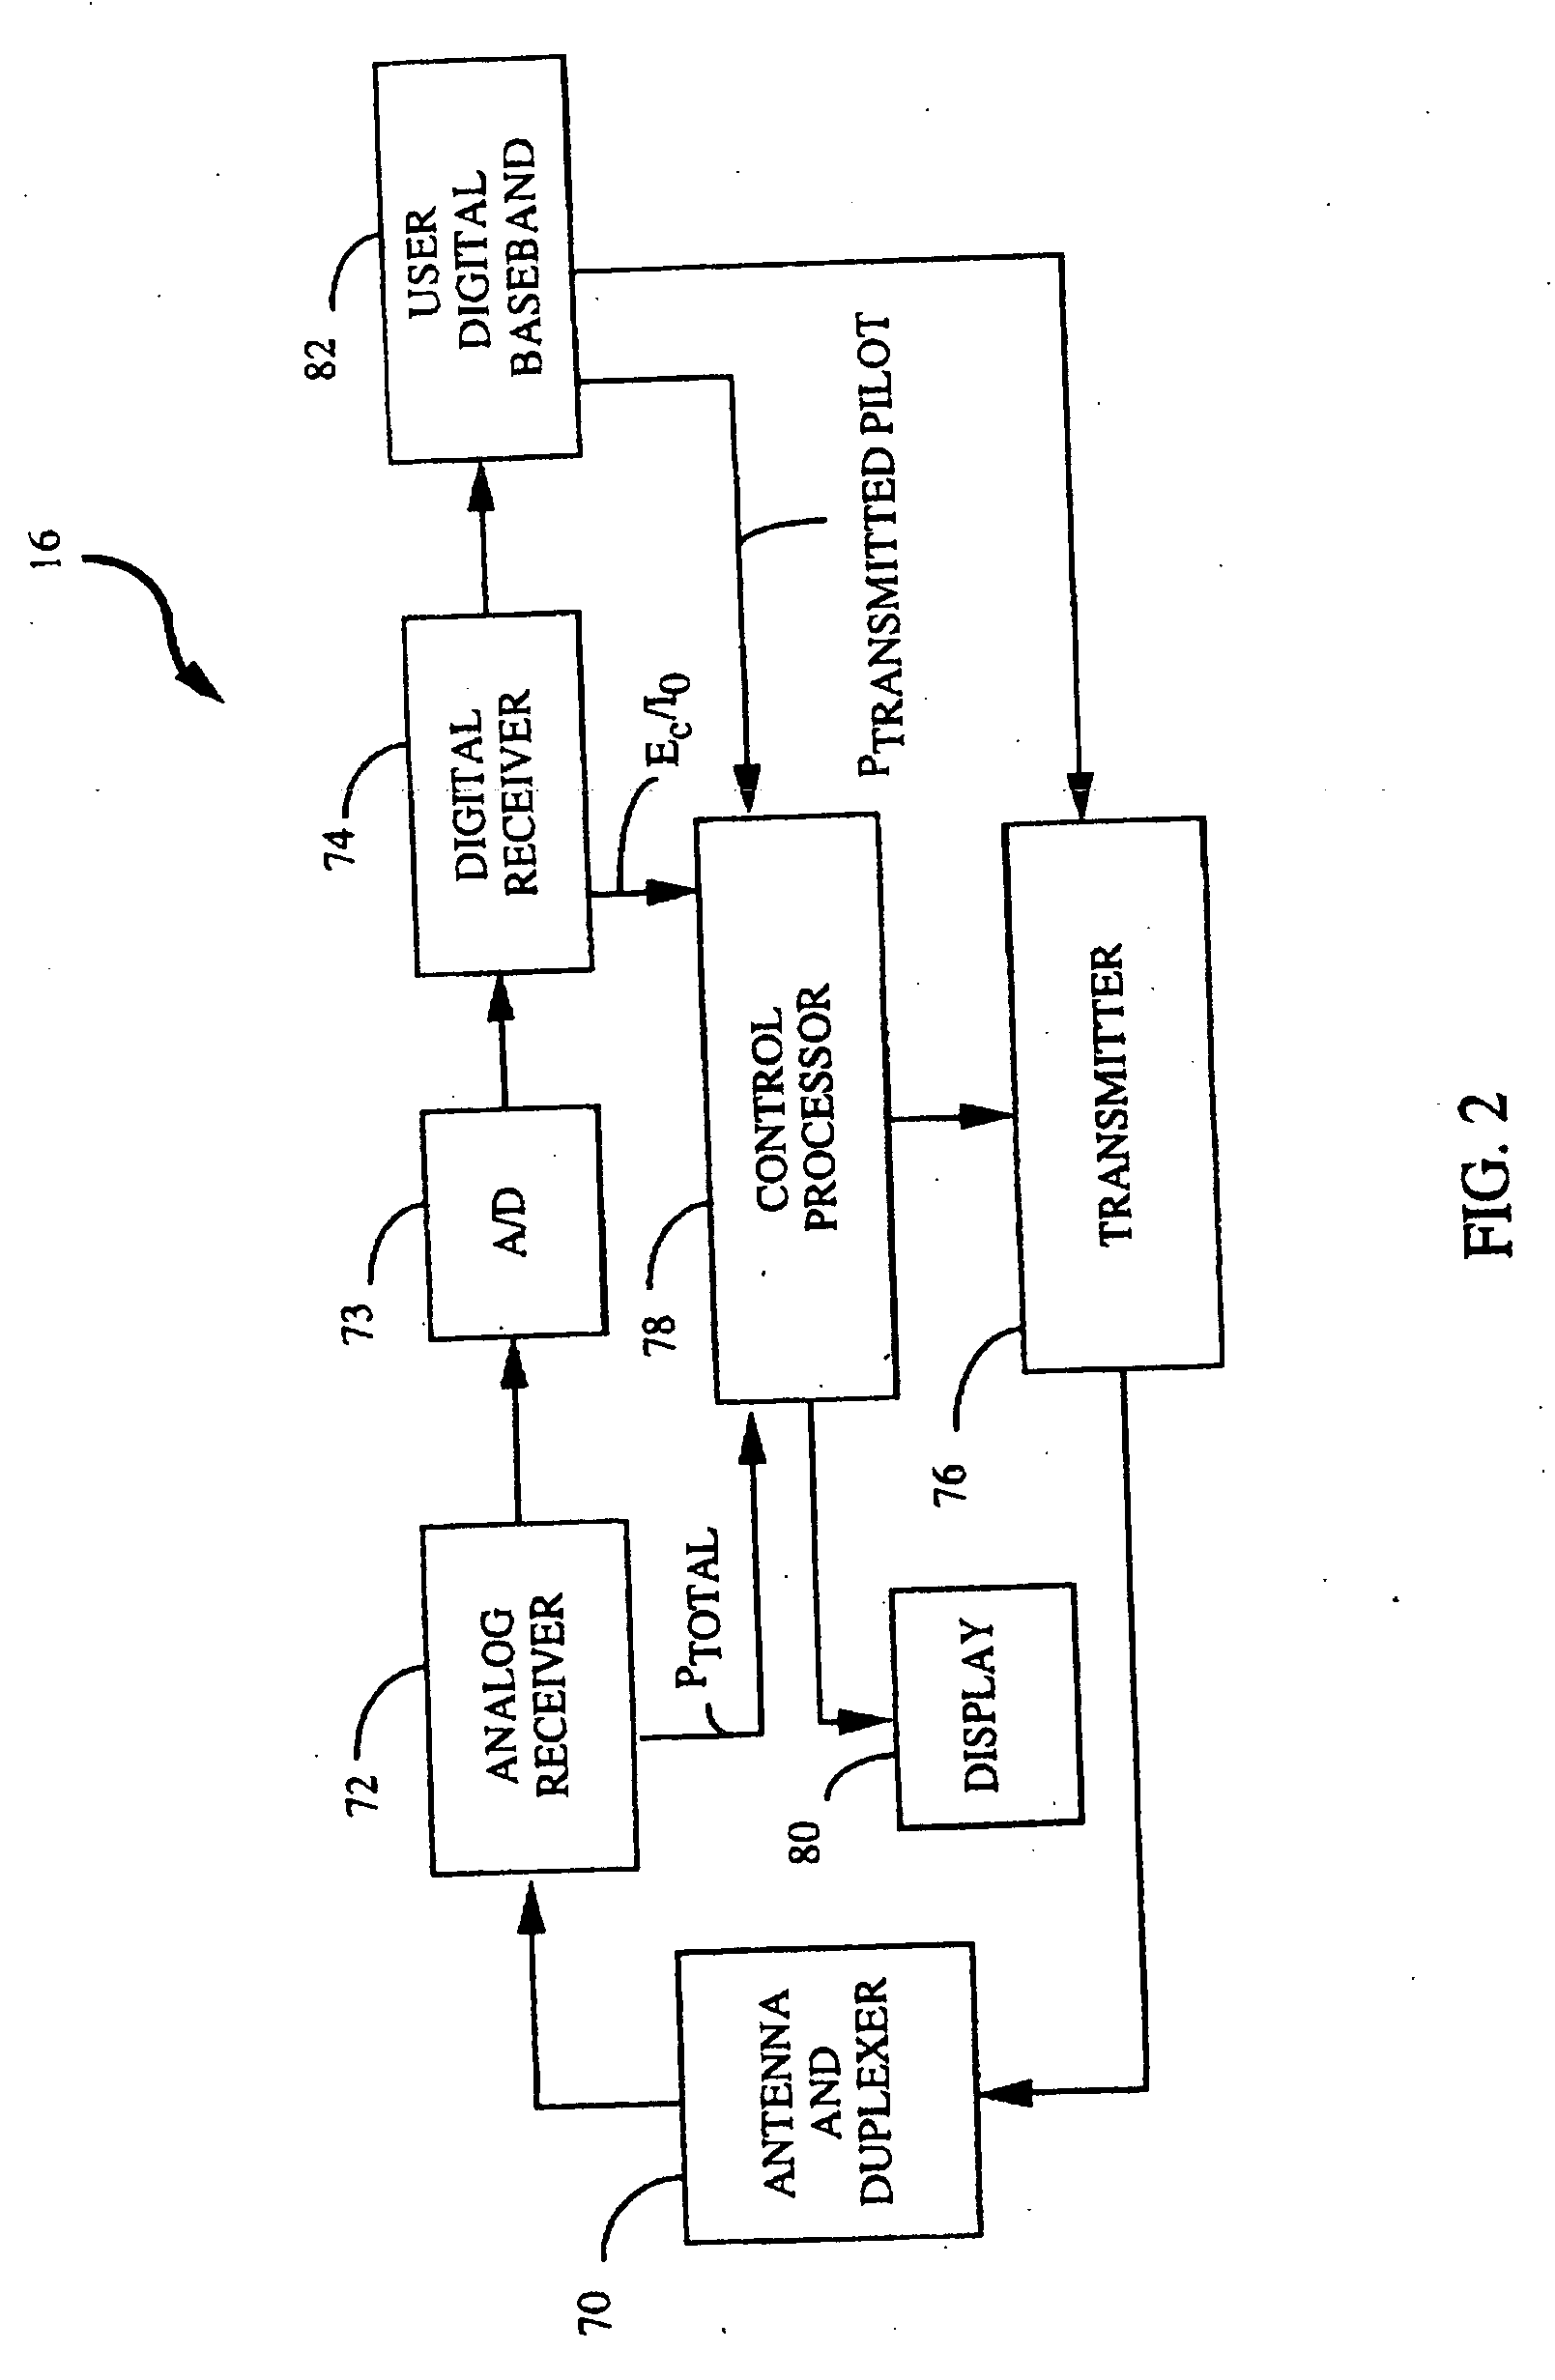 System and method for global power control